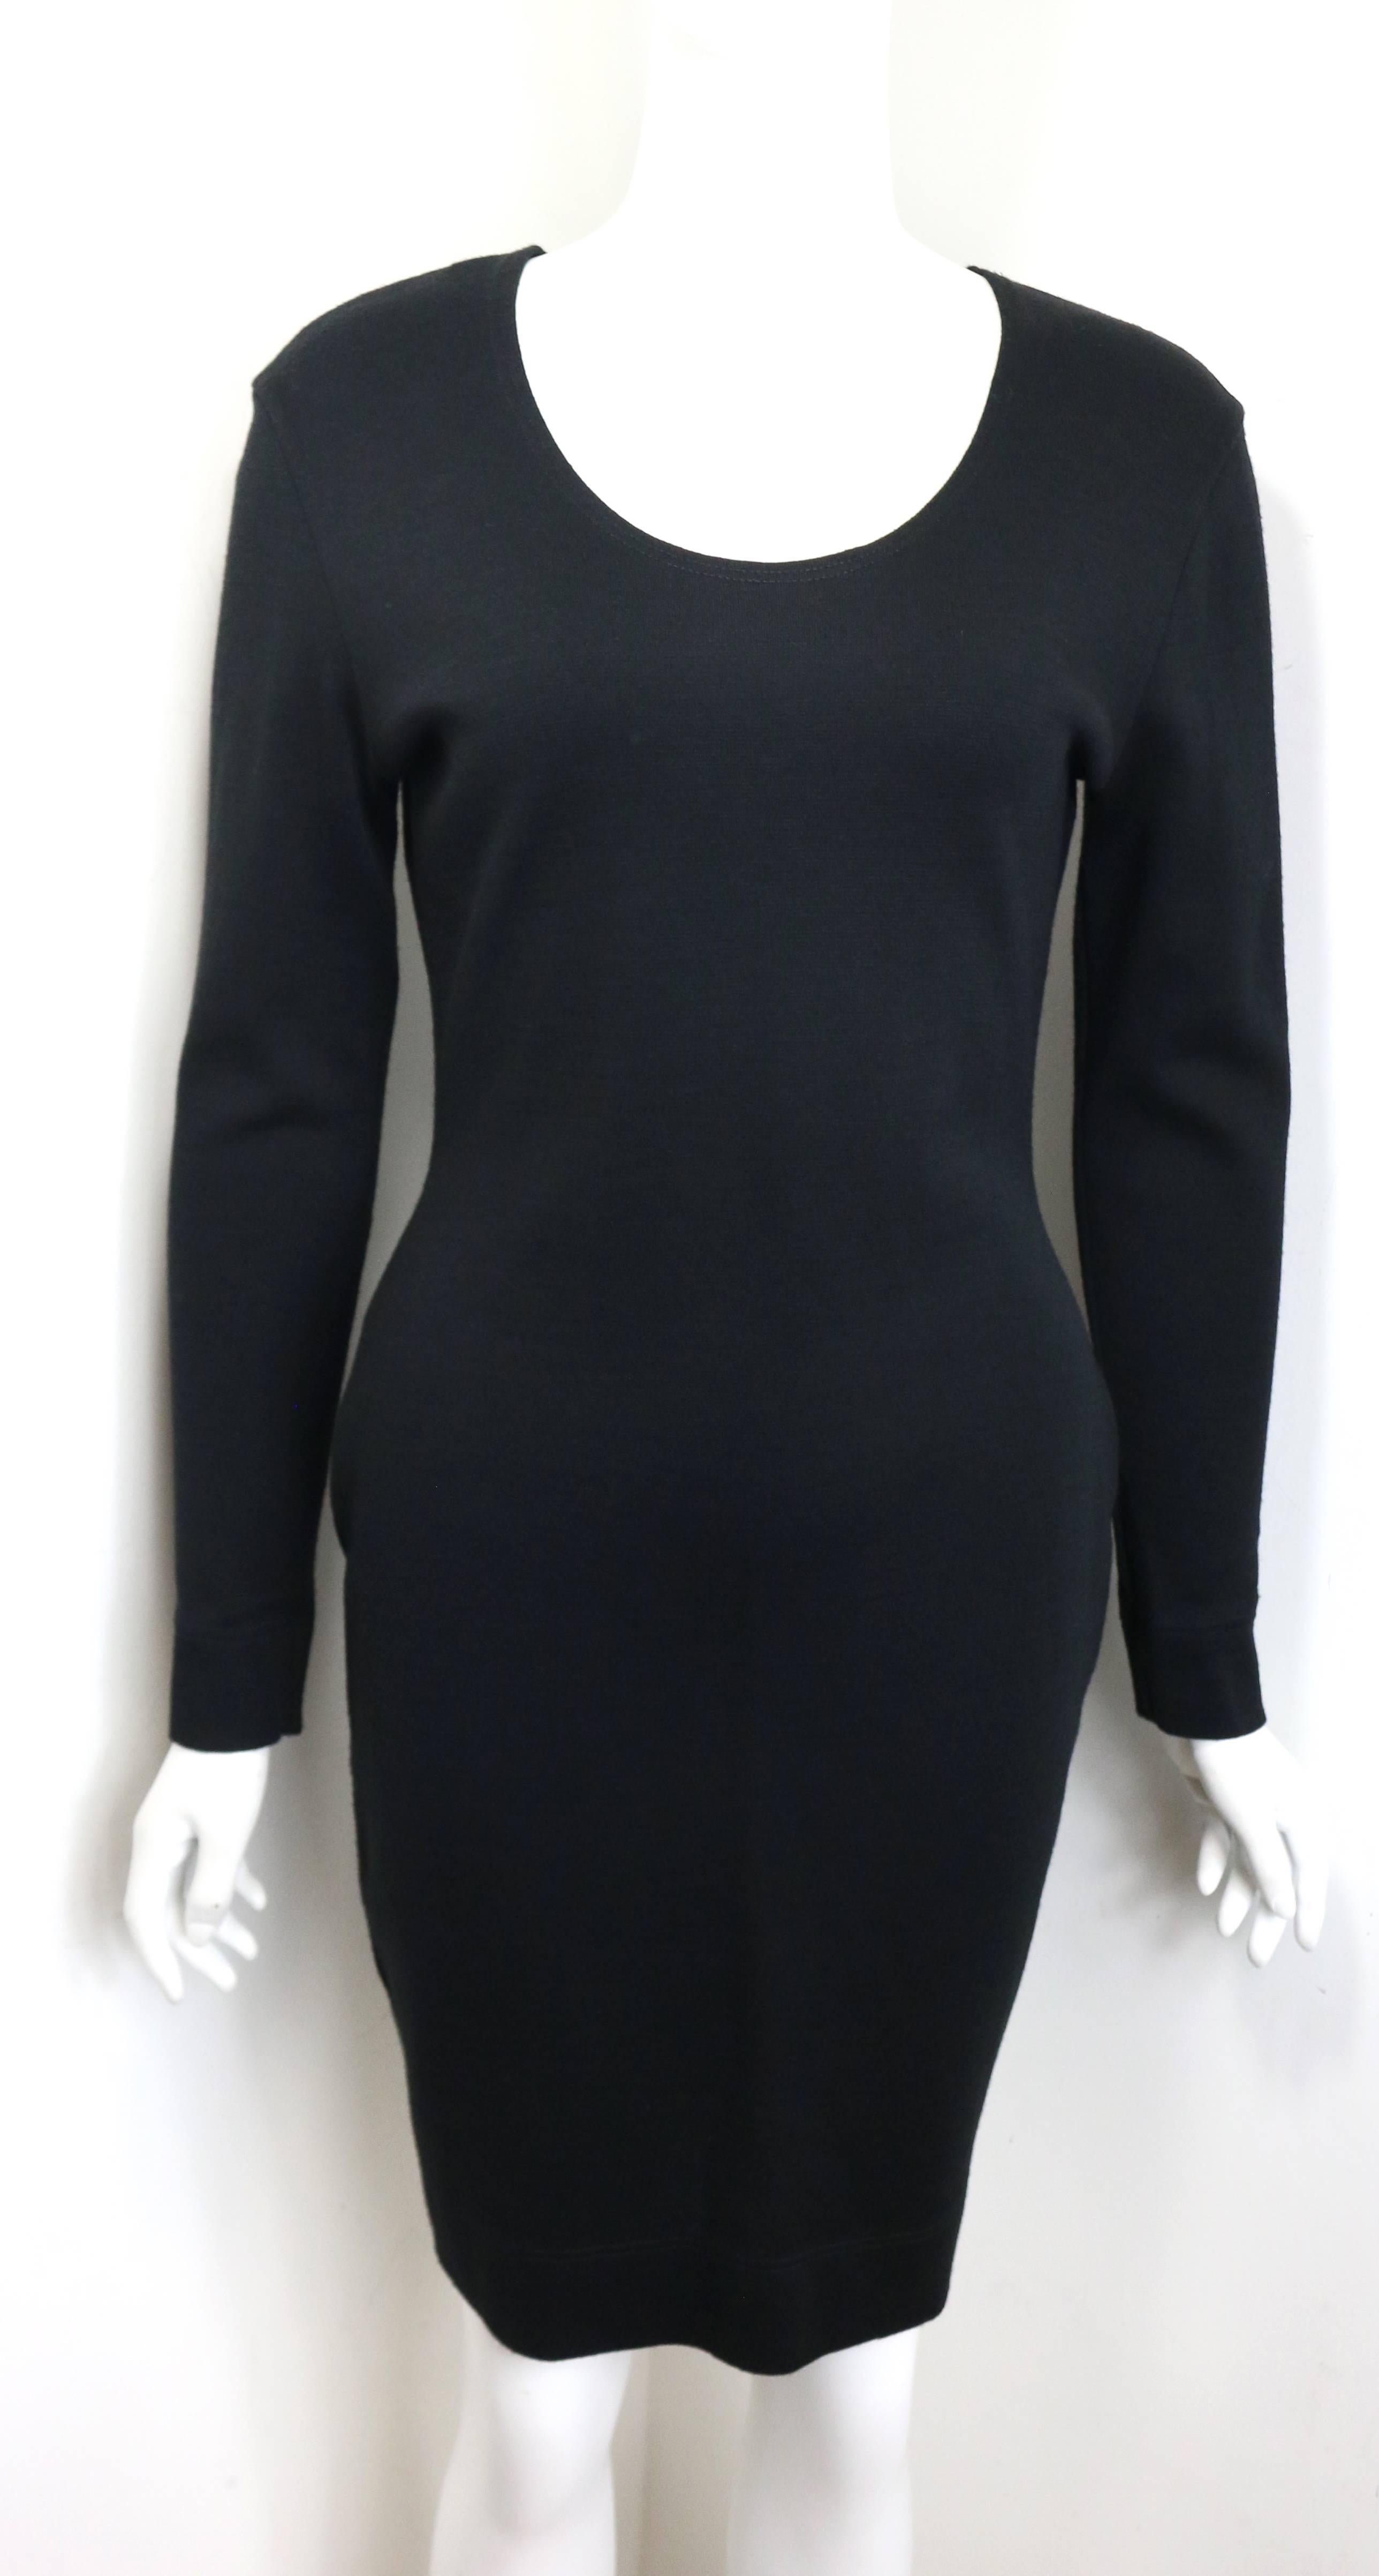 - Vintage 90s Cheap and Chic Moschino black wool dress. 

- Gold  